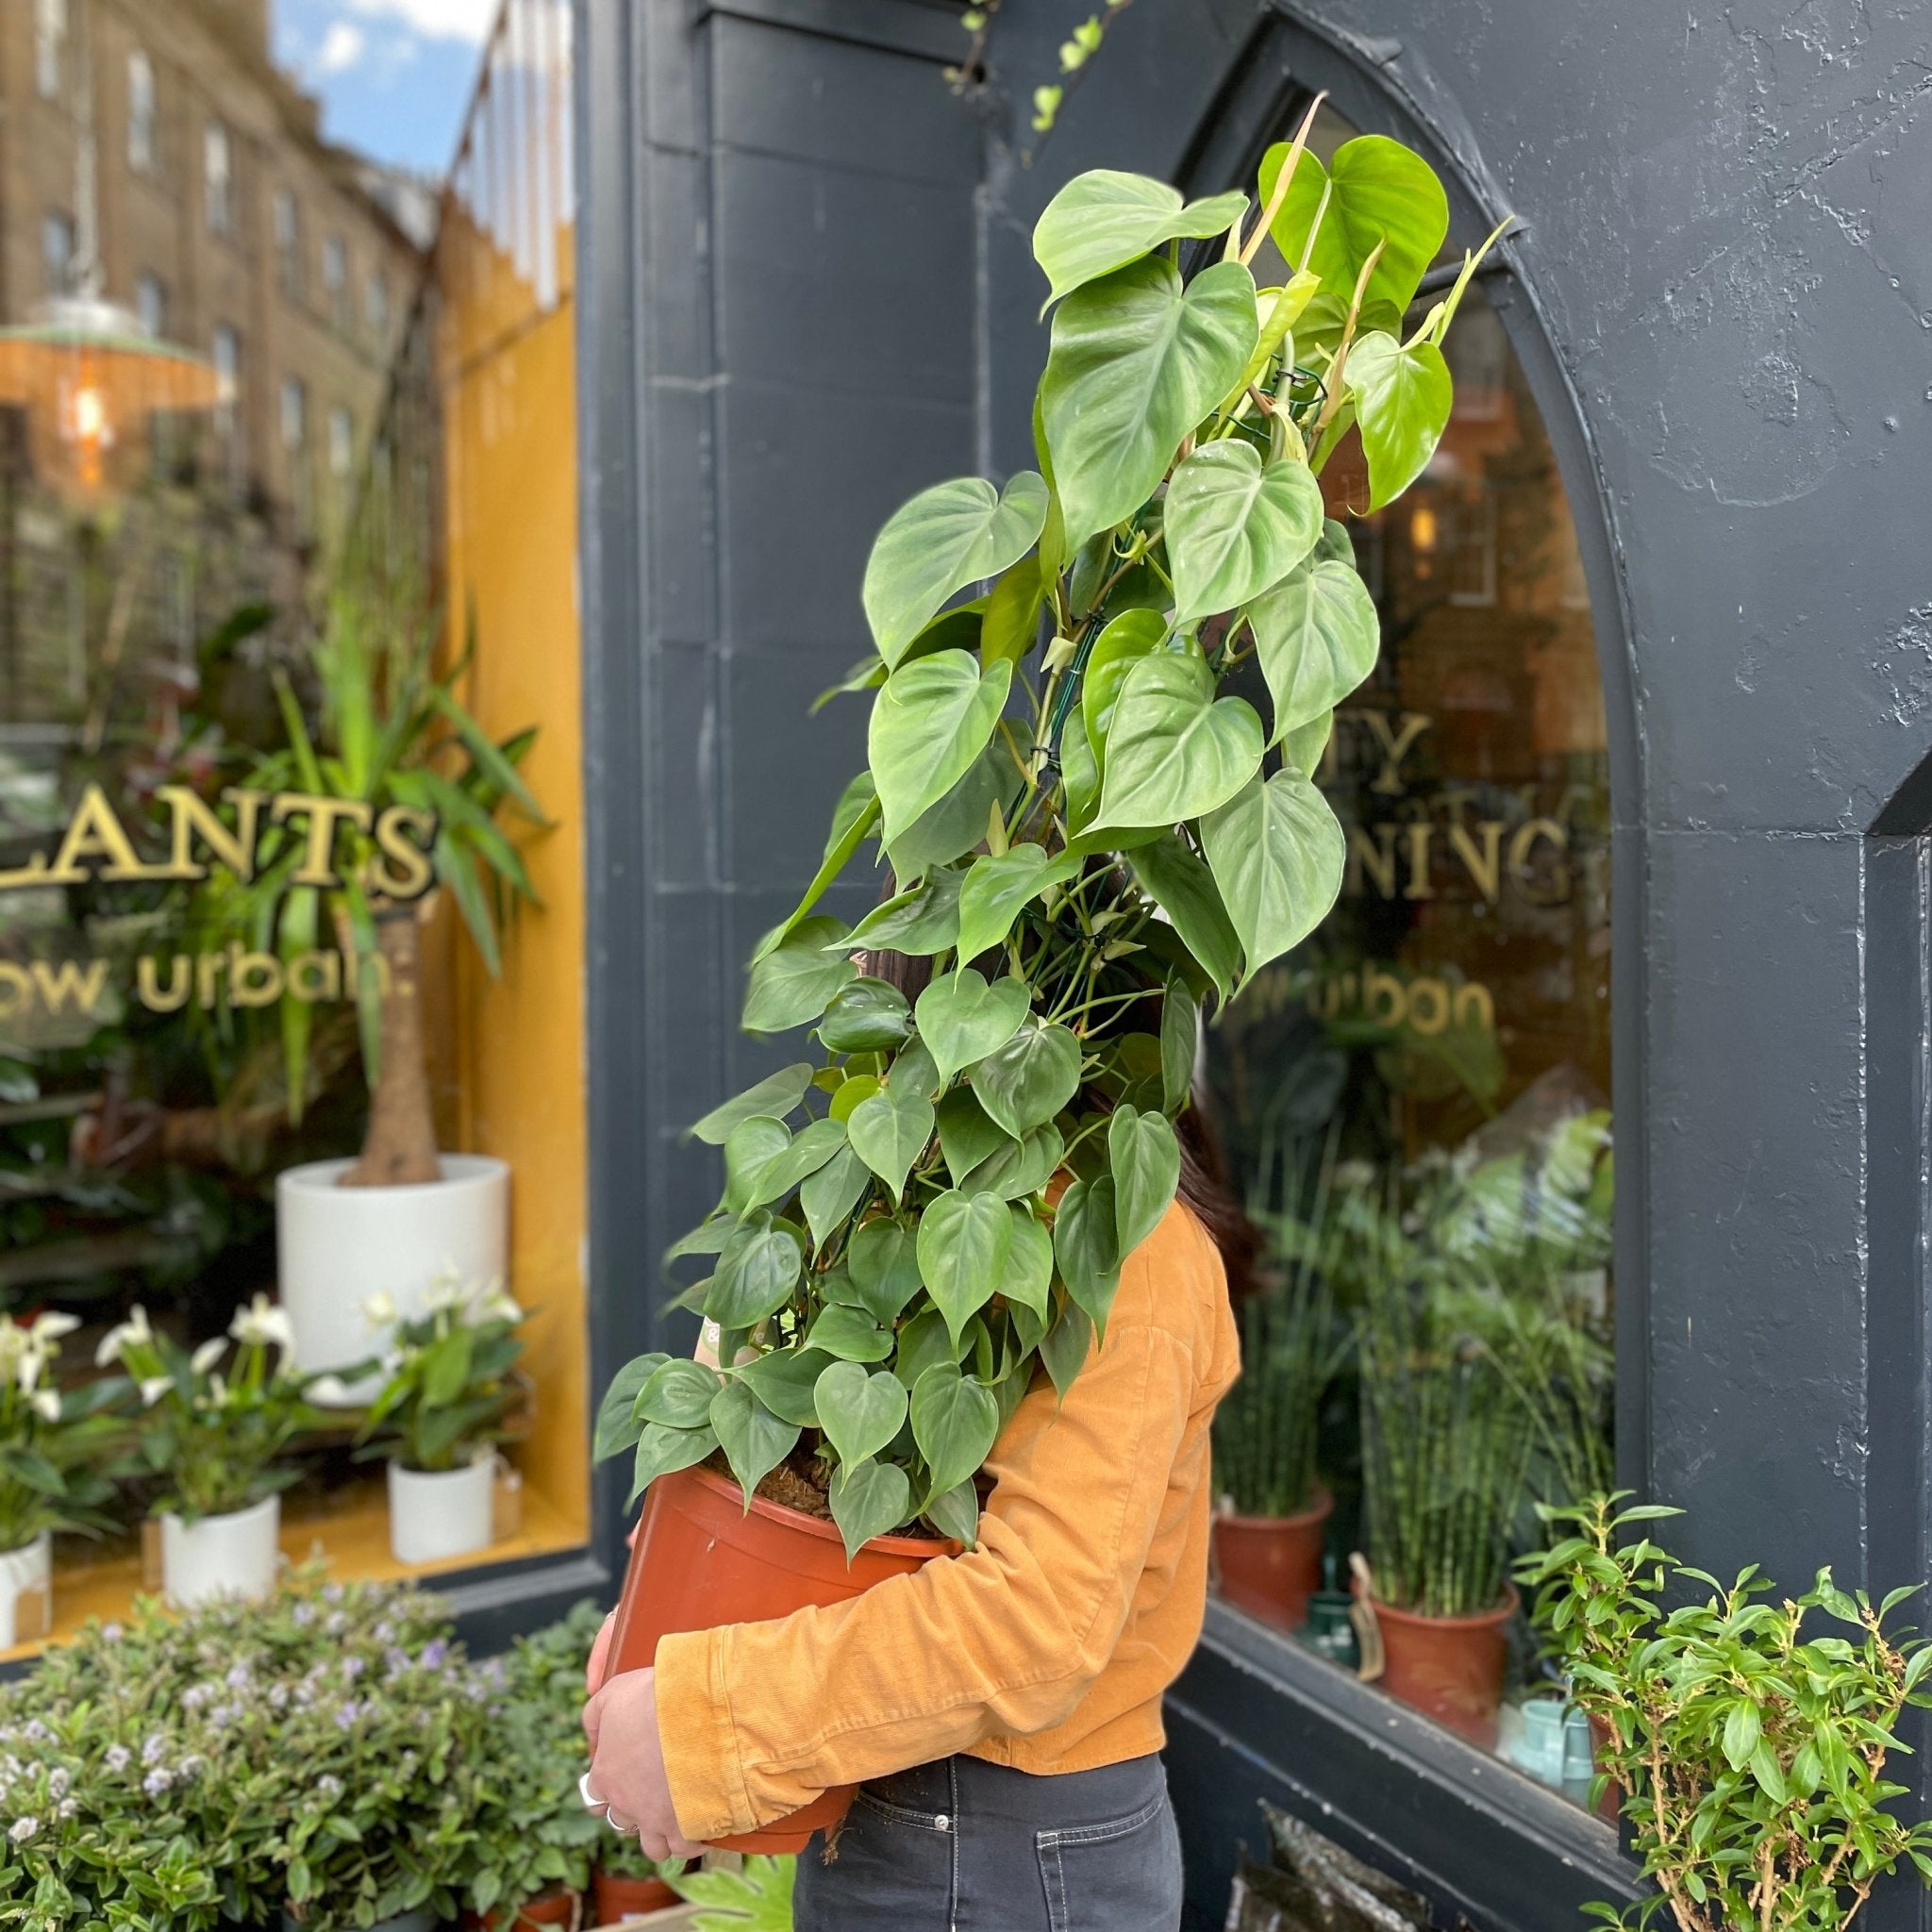 Philodendron scandens (120cm) - grow urban. UK